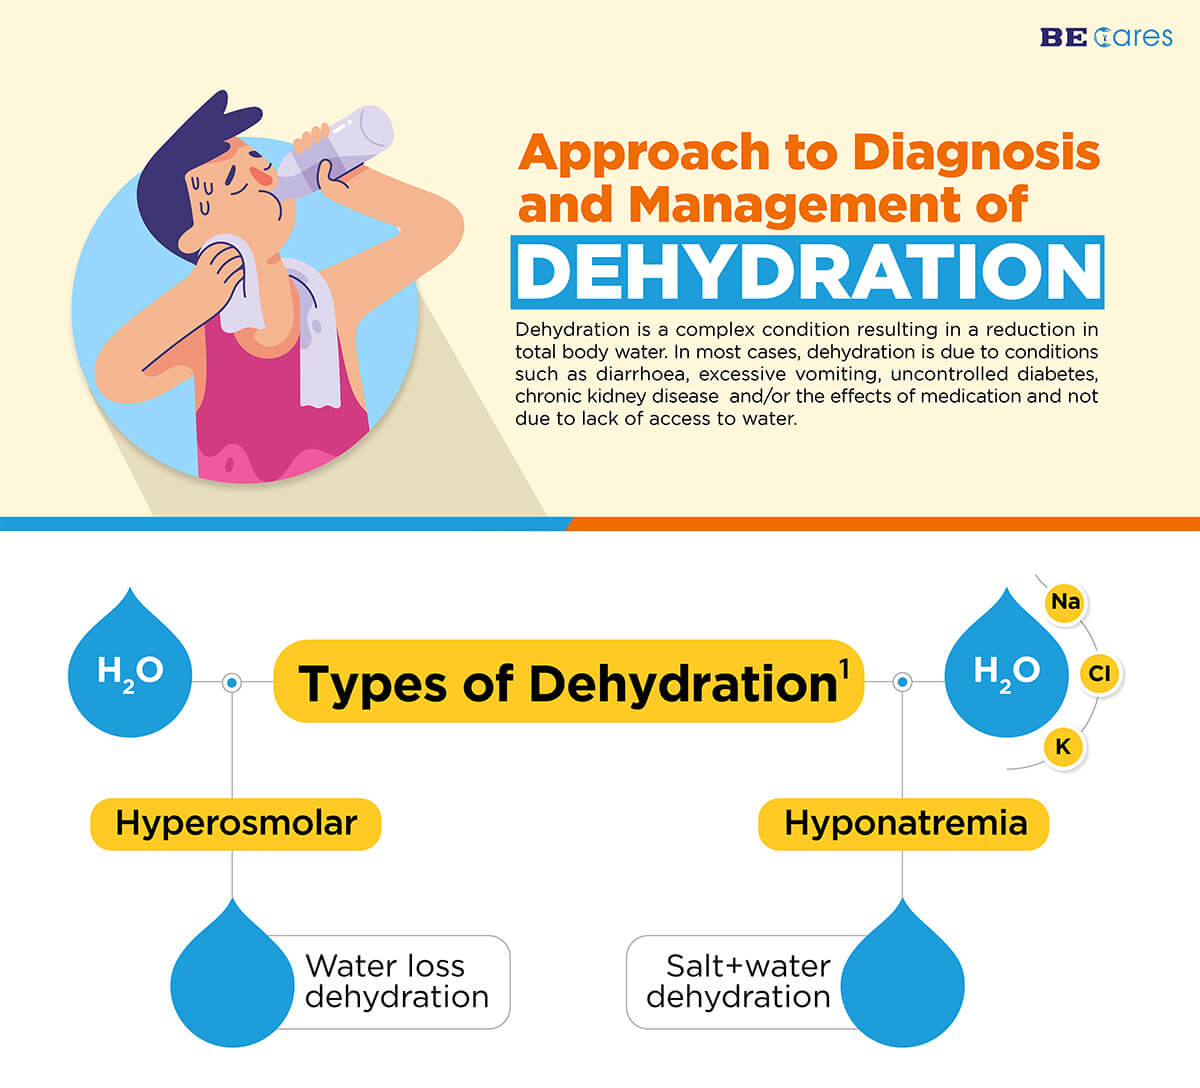 research work on dehydration